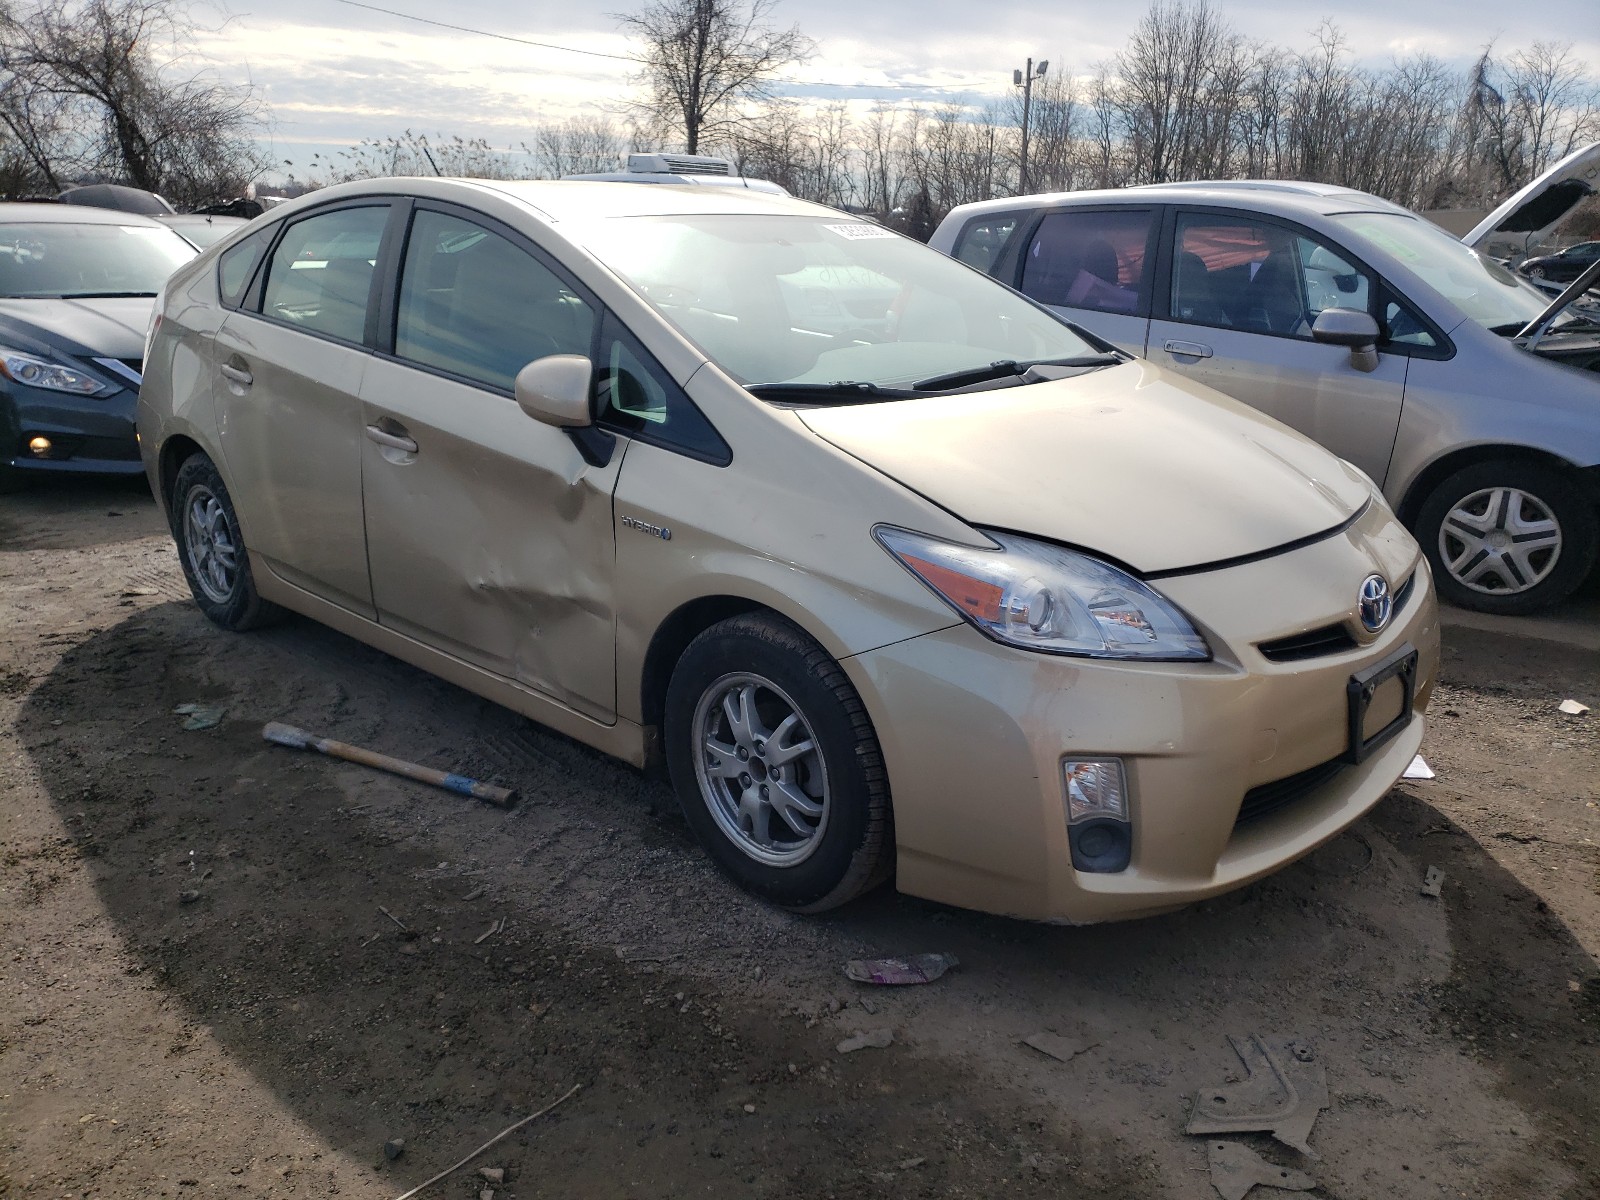 vin: JTDKN3DU0A0034384 JTDKN3DU0A0034384 2010 toyota prius 1800 for Sale in US MD